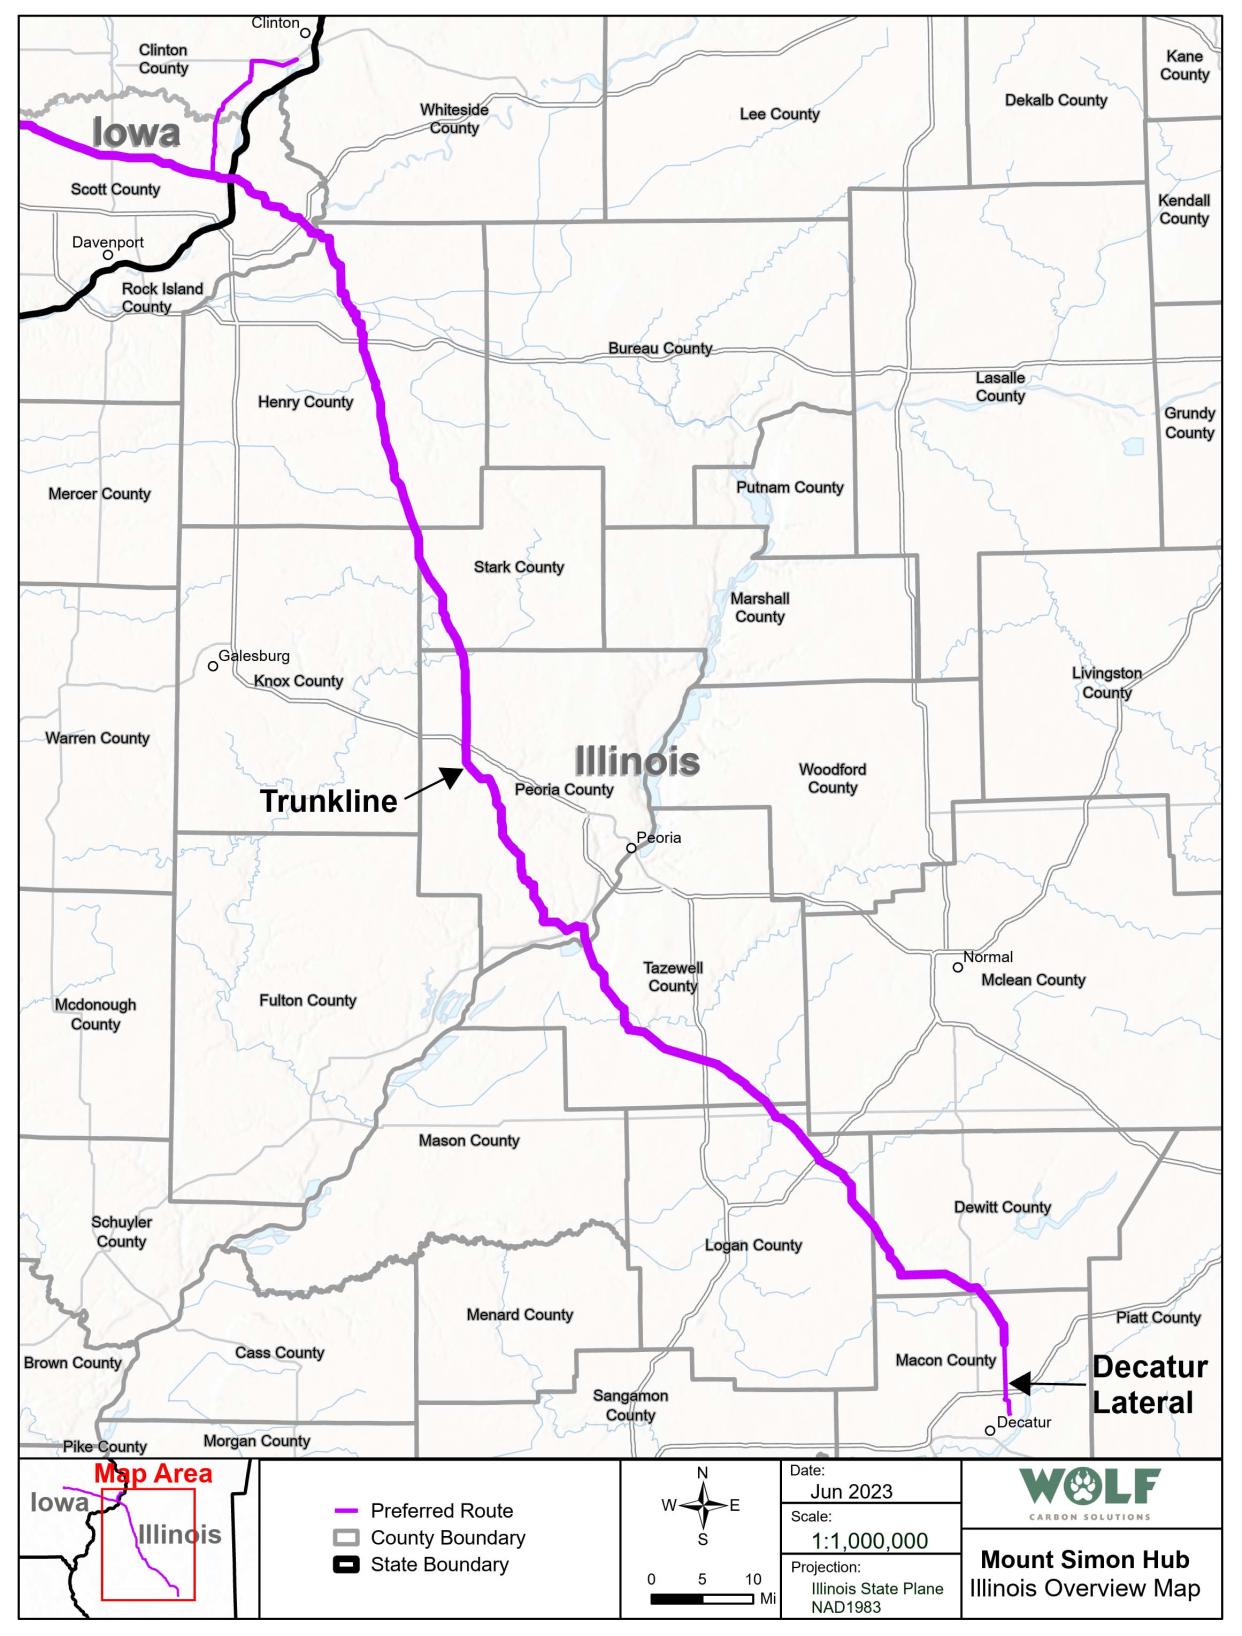 The route of the CO2 pipeline Wolf Carbon Solutions plans to build through Illinois.